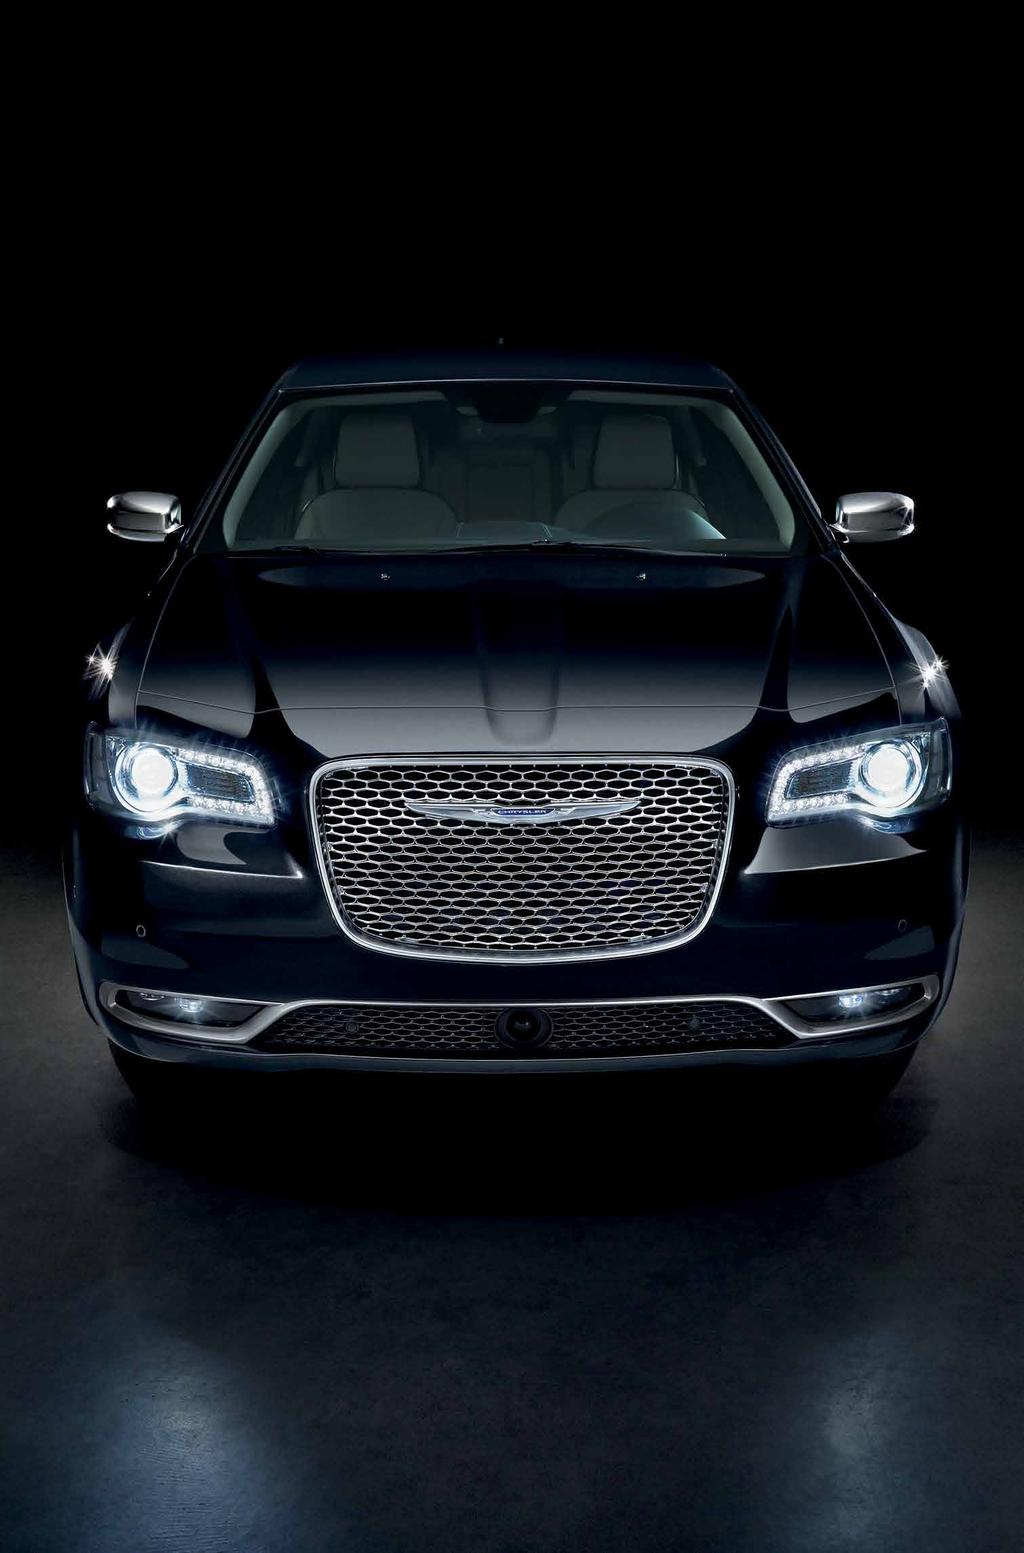 the 2015 Chrysler 300 THE RETURN OF THE BIG, BOLD AND